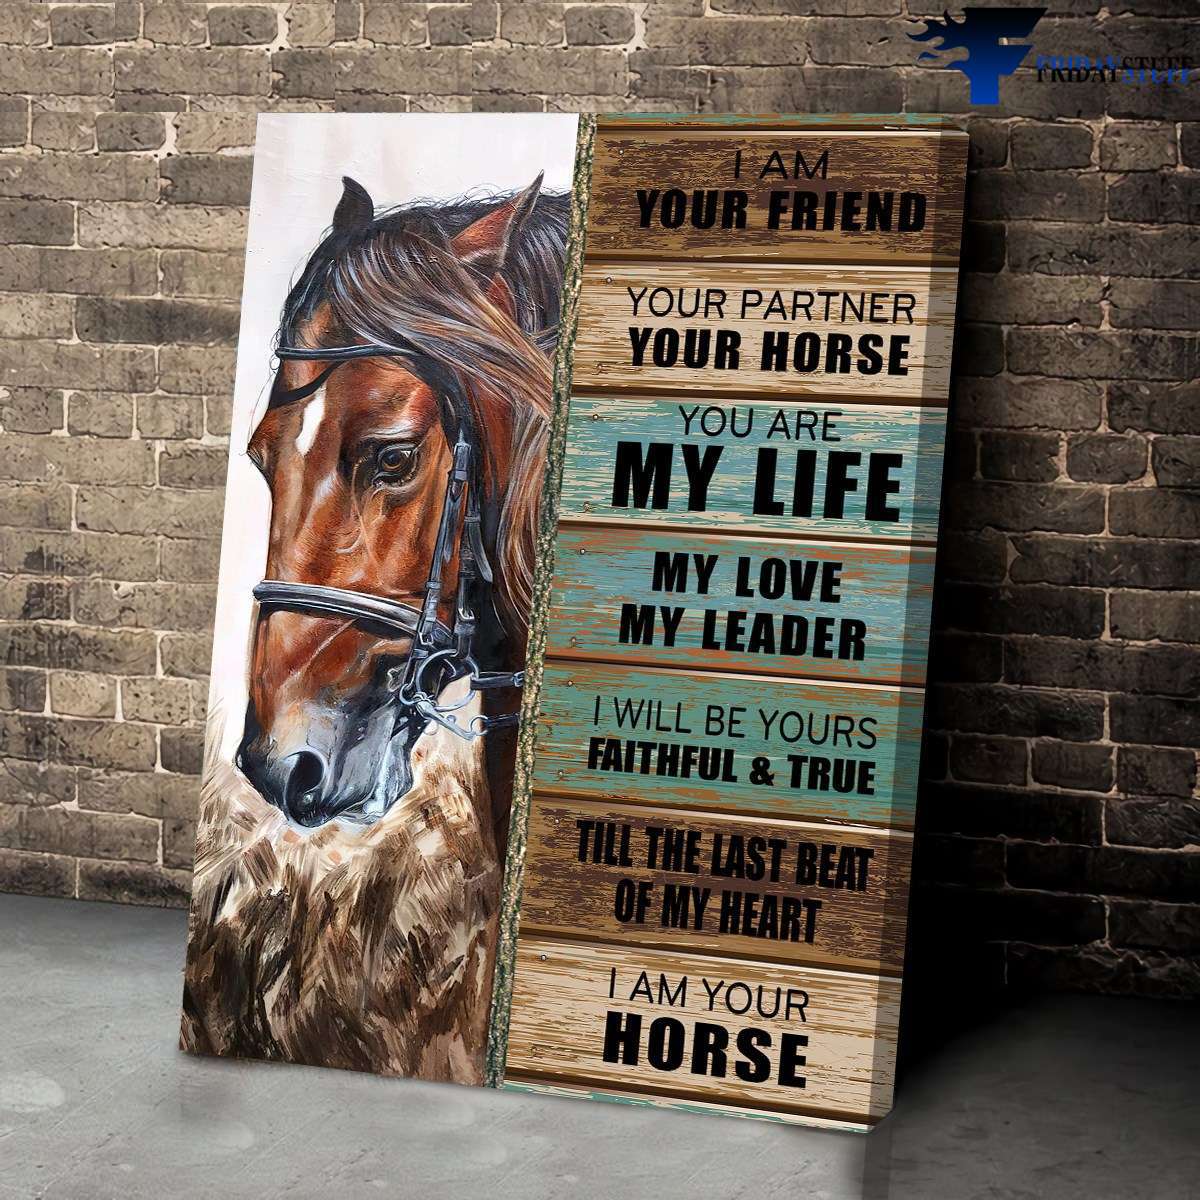 Your Horse - I Am Your Friend, Your Partner, You Are My Life, My Love, My Leader, I Will Be Yours Faithful And True, Till The Last Beat Of My Heart, I Am Your Horse